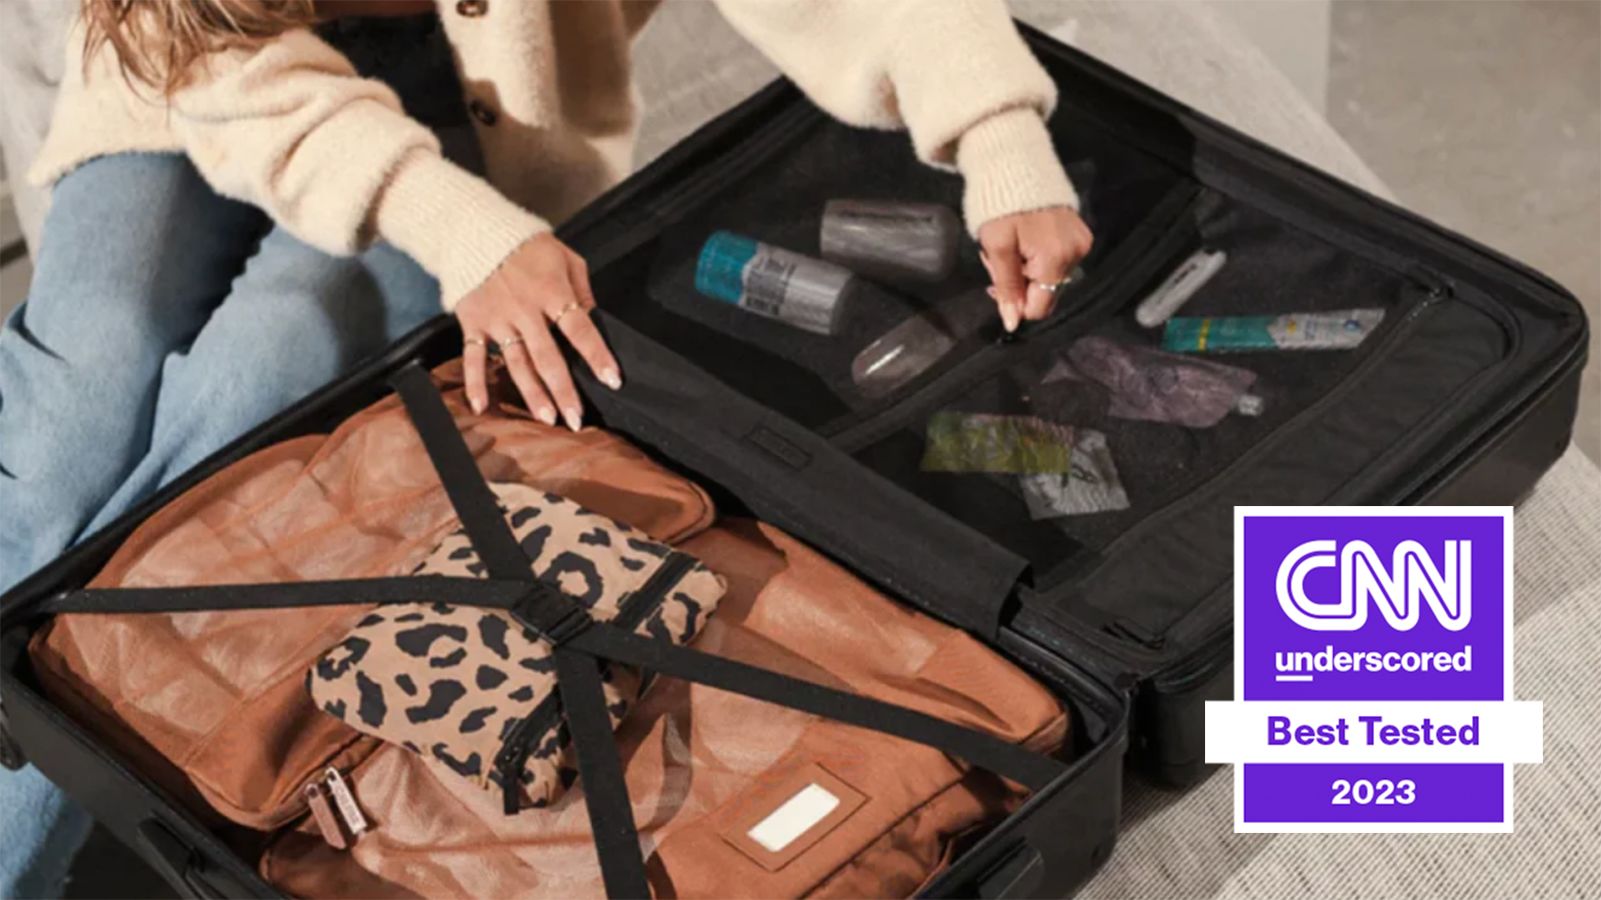 Away Luggage review: Here's how the Away carry-on really works